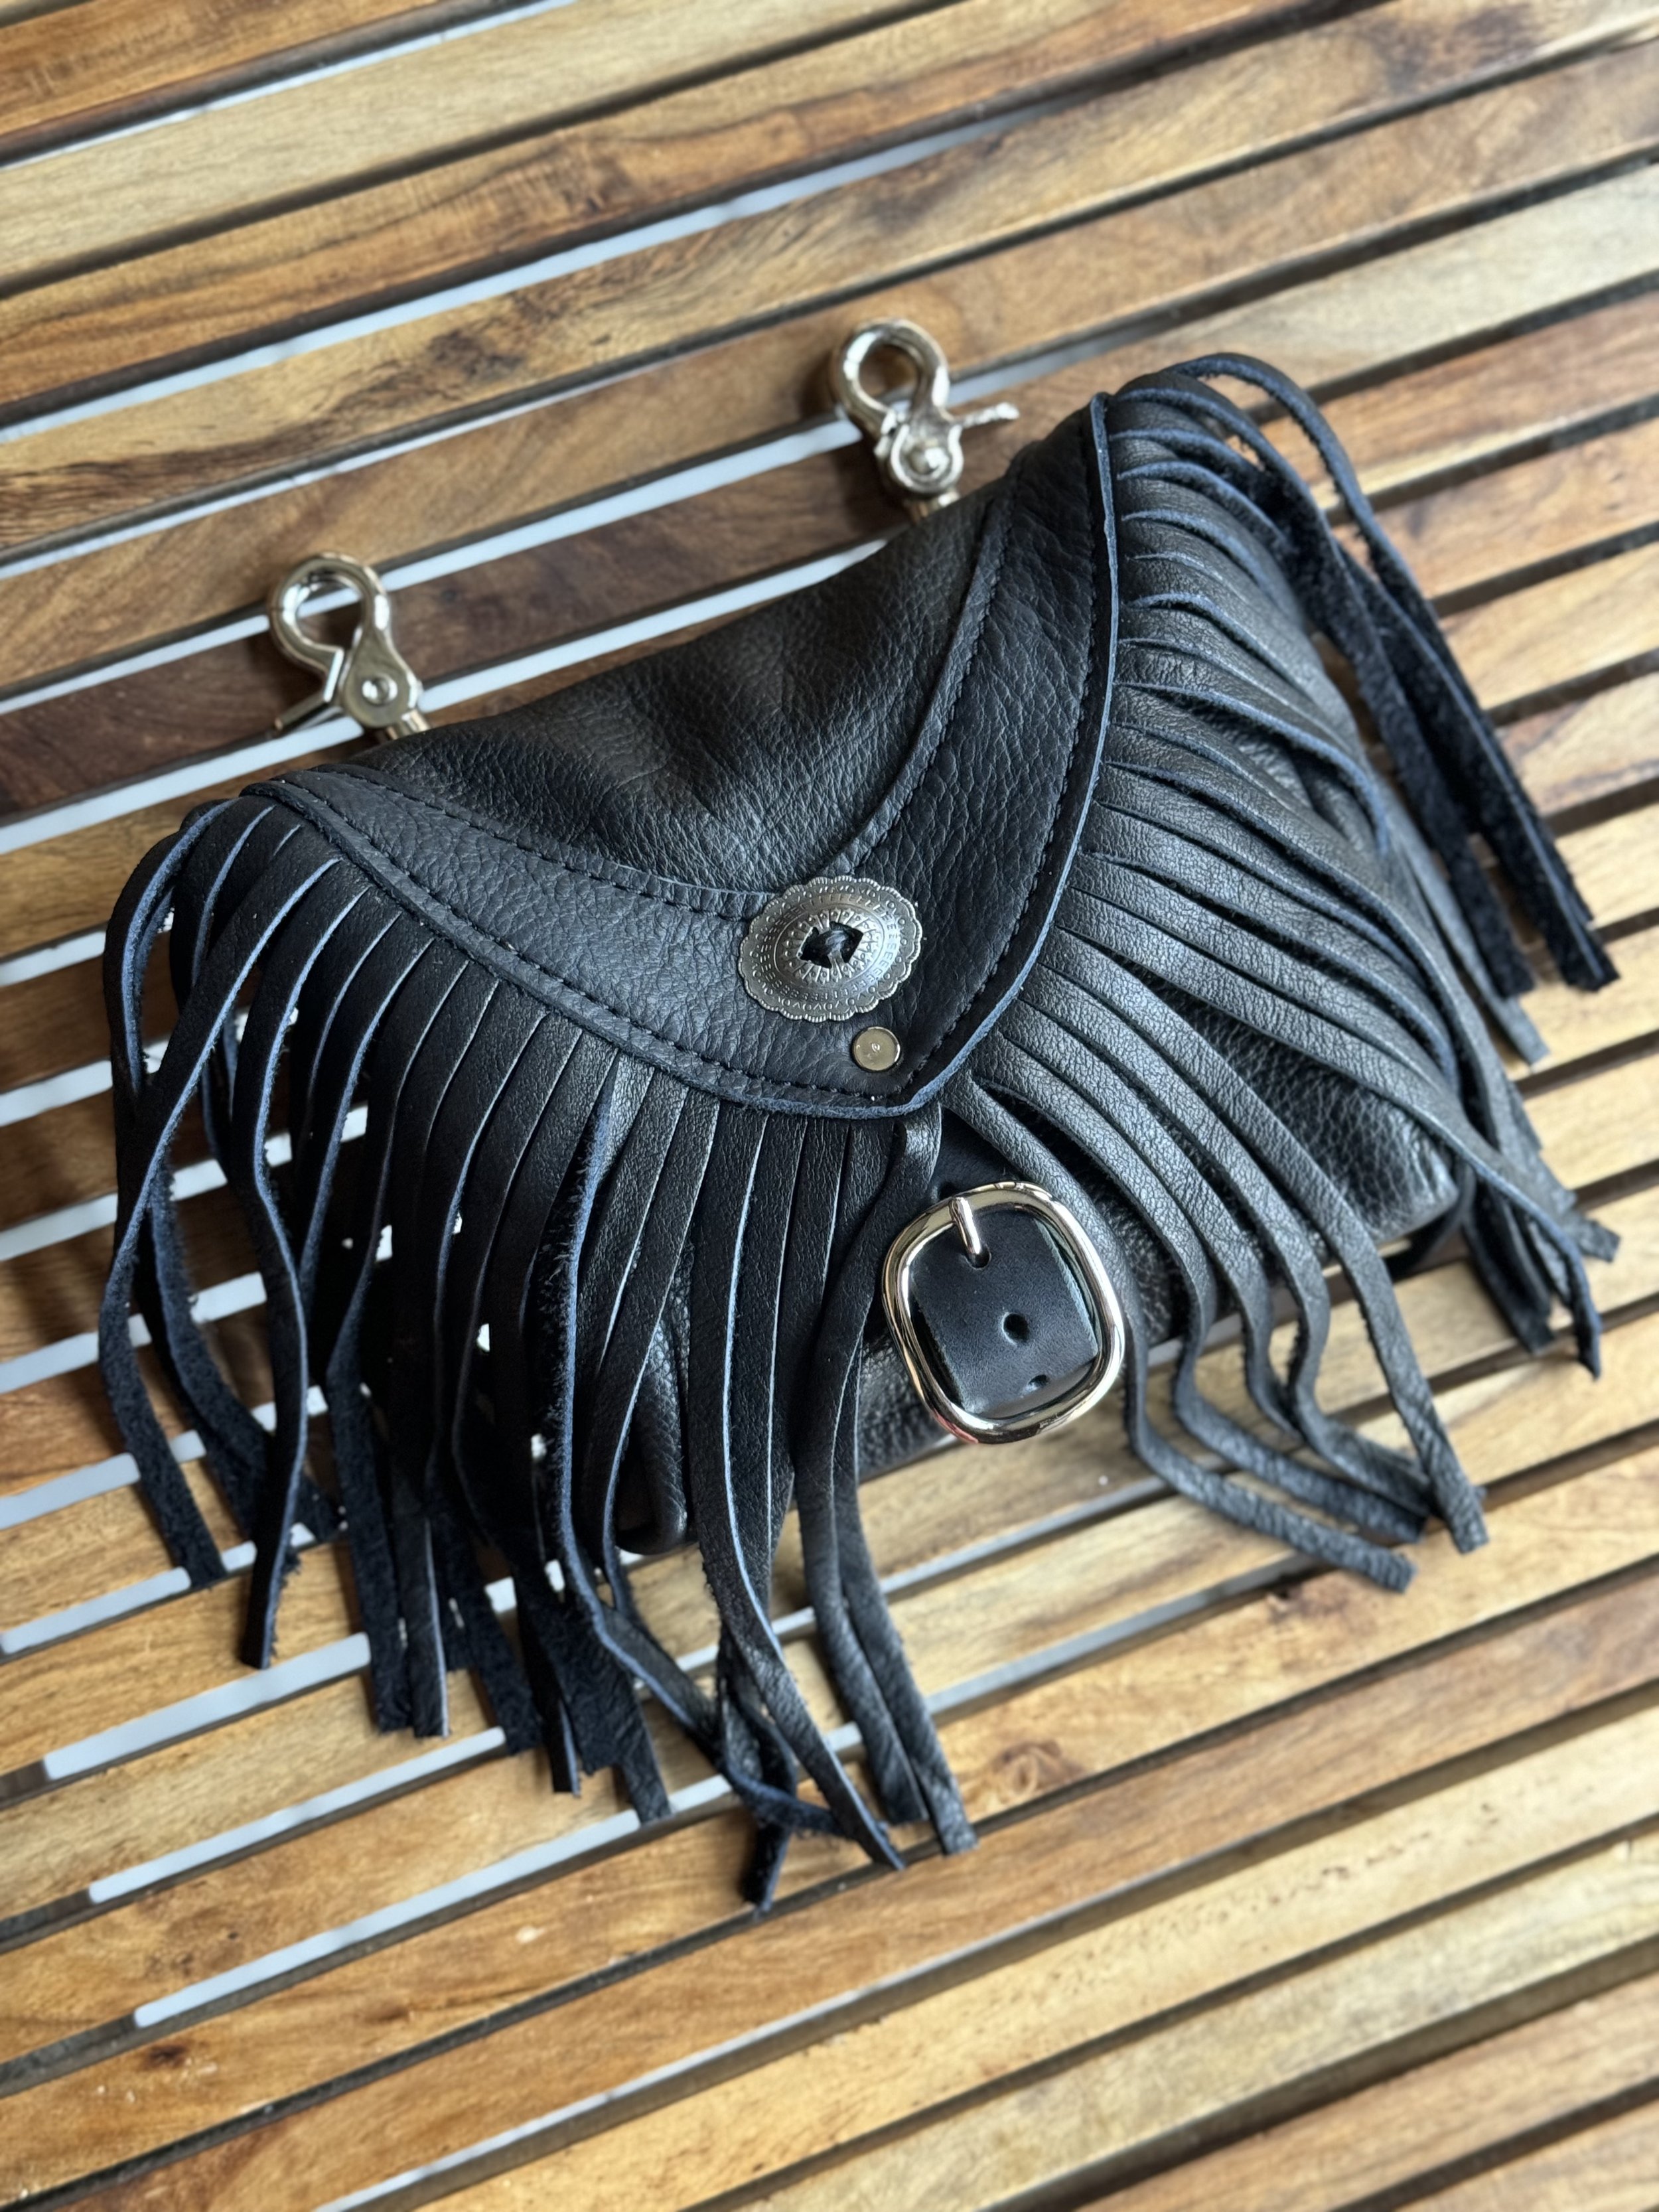 Black bison leather body and fringe, Nickel hardware, Concho - On The Road Convertible Hip Bag